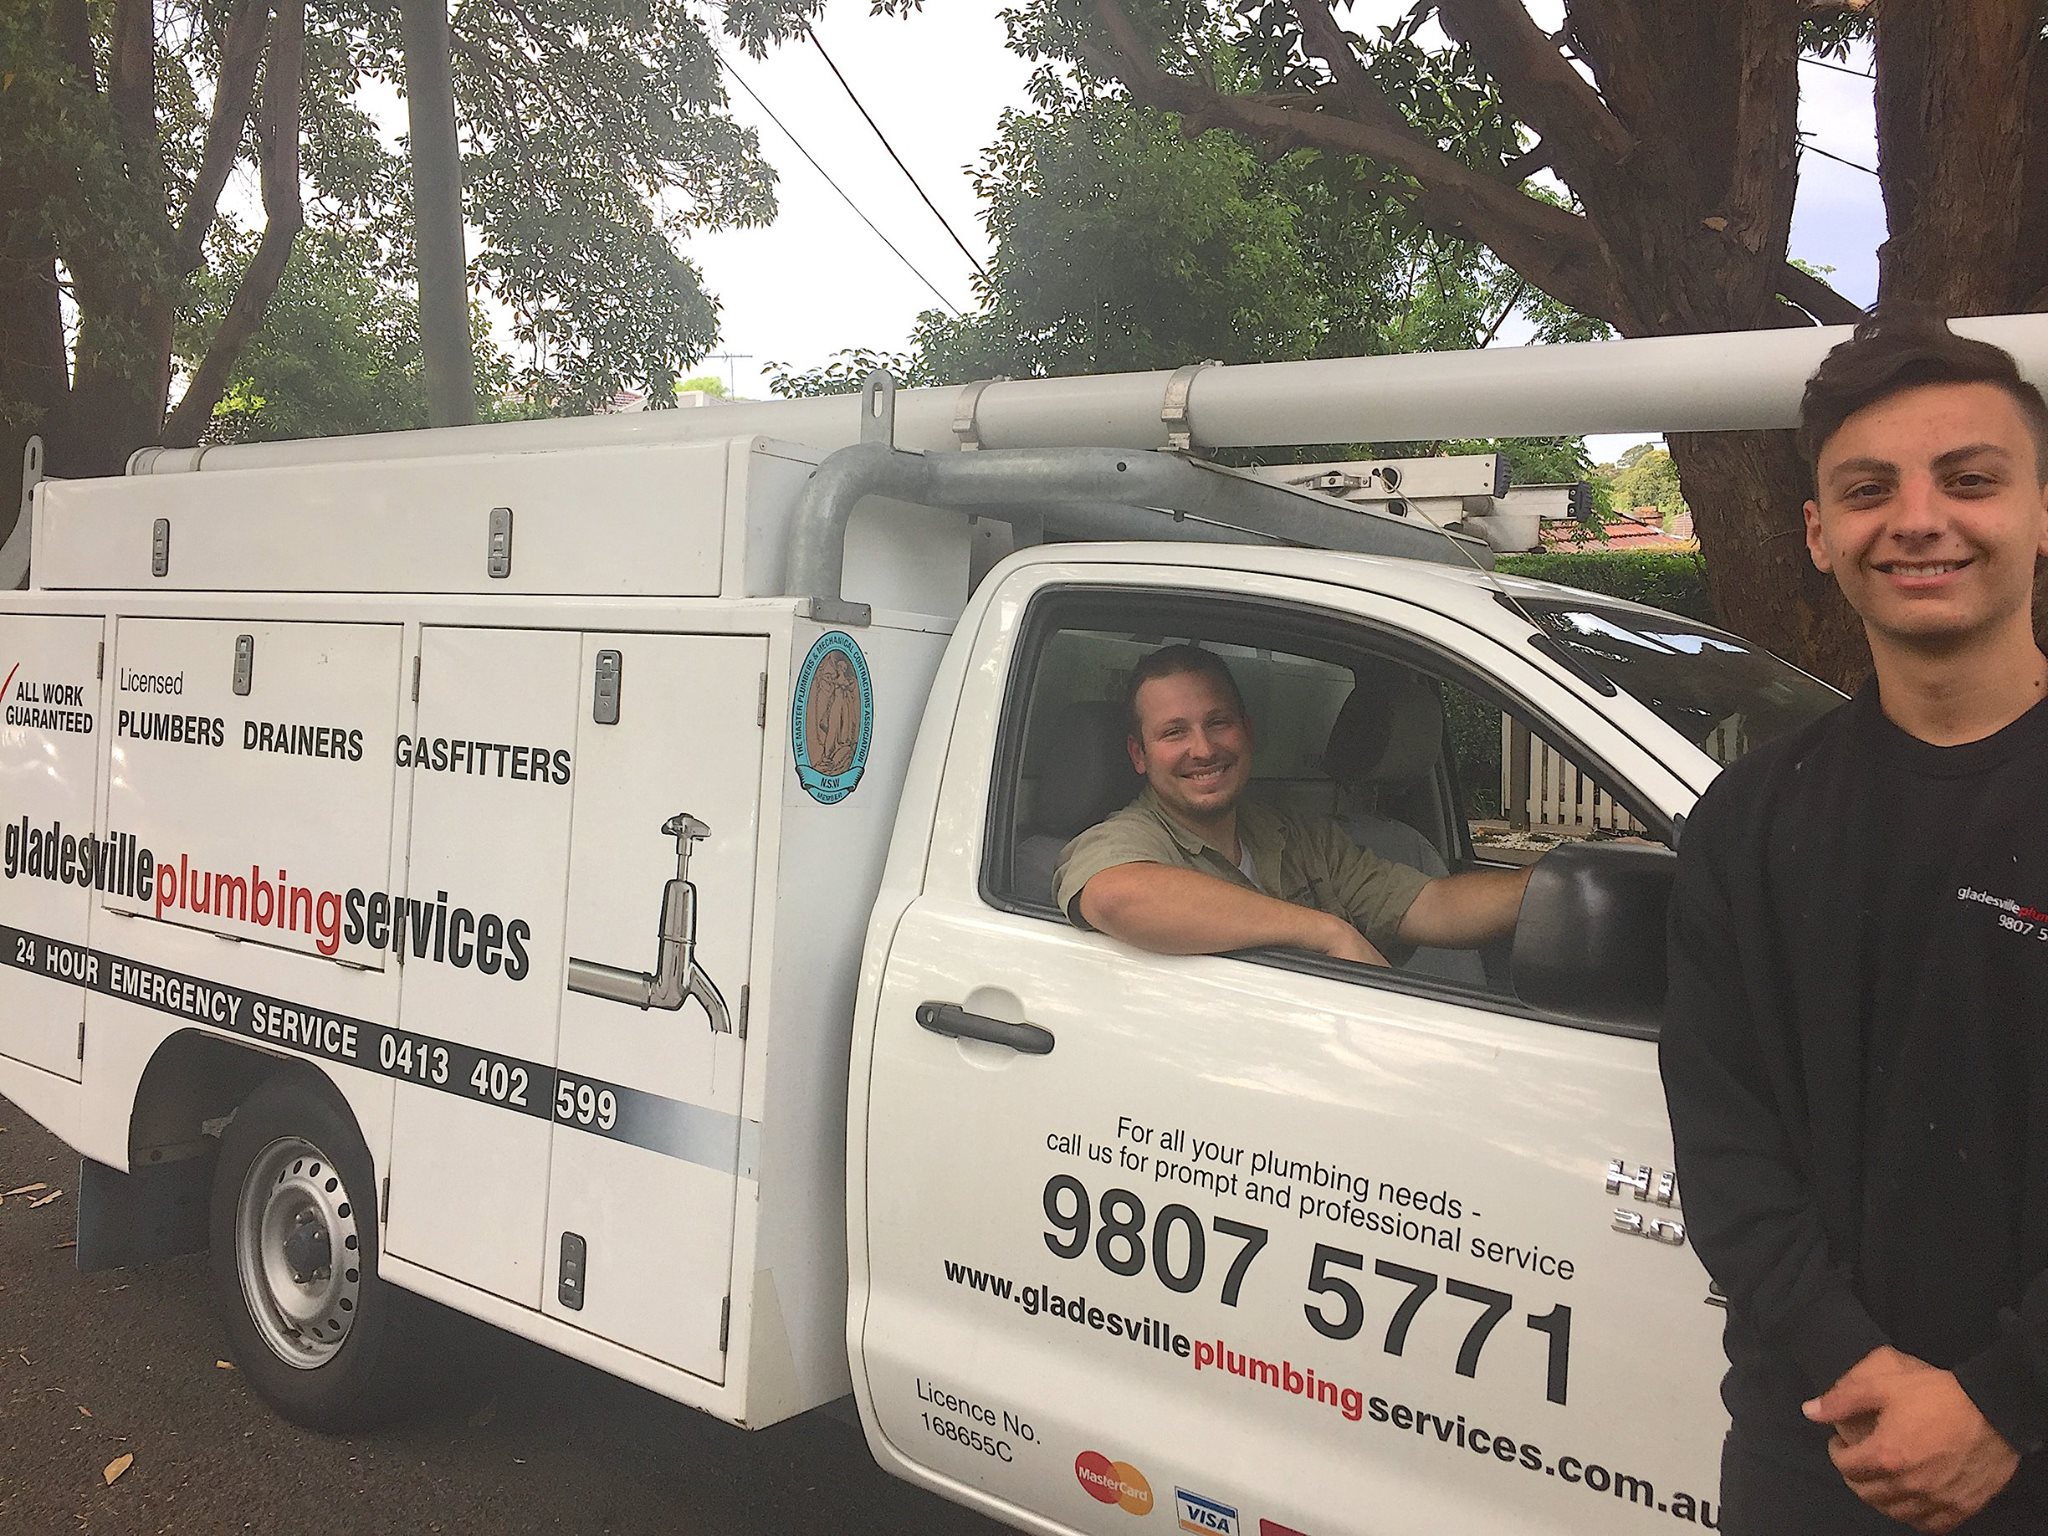 Gladesville Plumbing Services - emergency plumbers near you